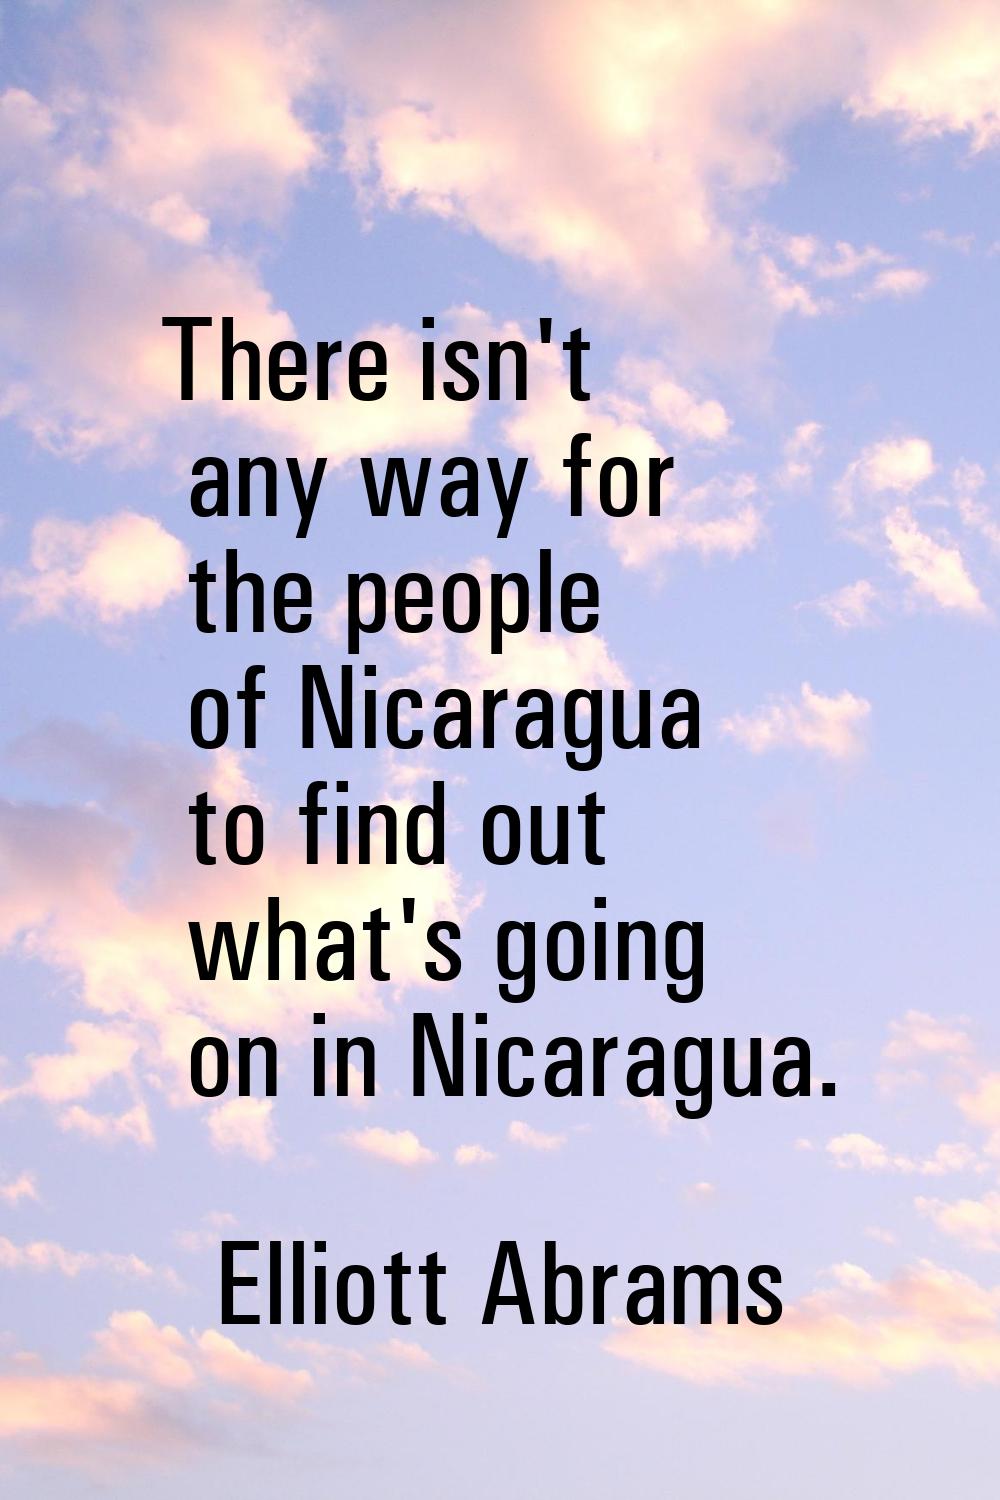 There isn't any way for the people of Nicaragua to find out what's going on in Nicaragua.